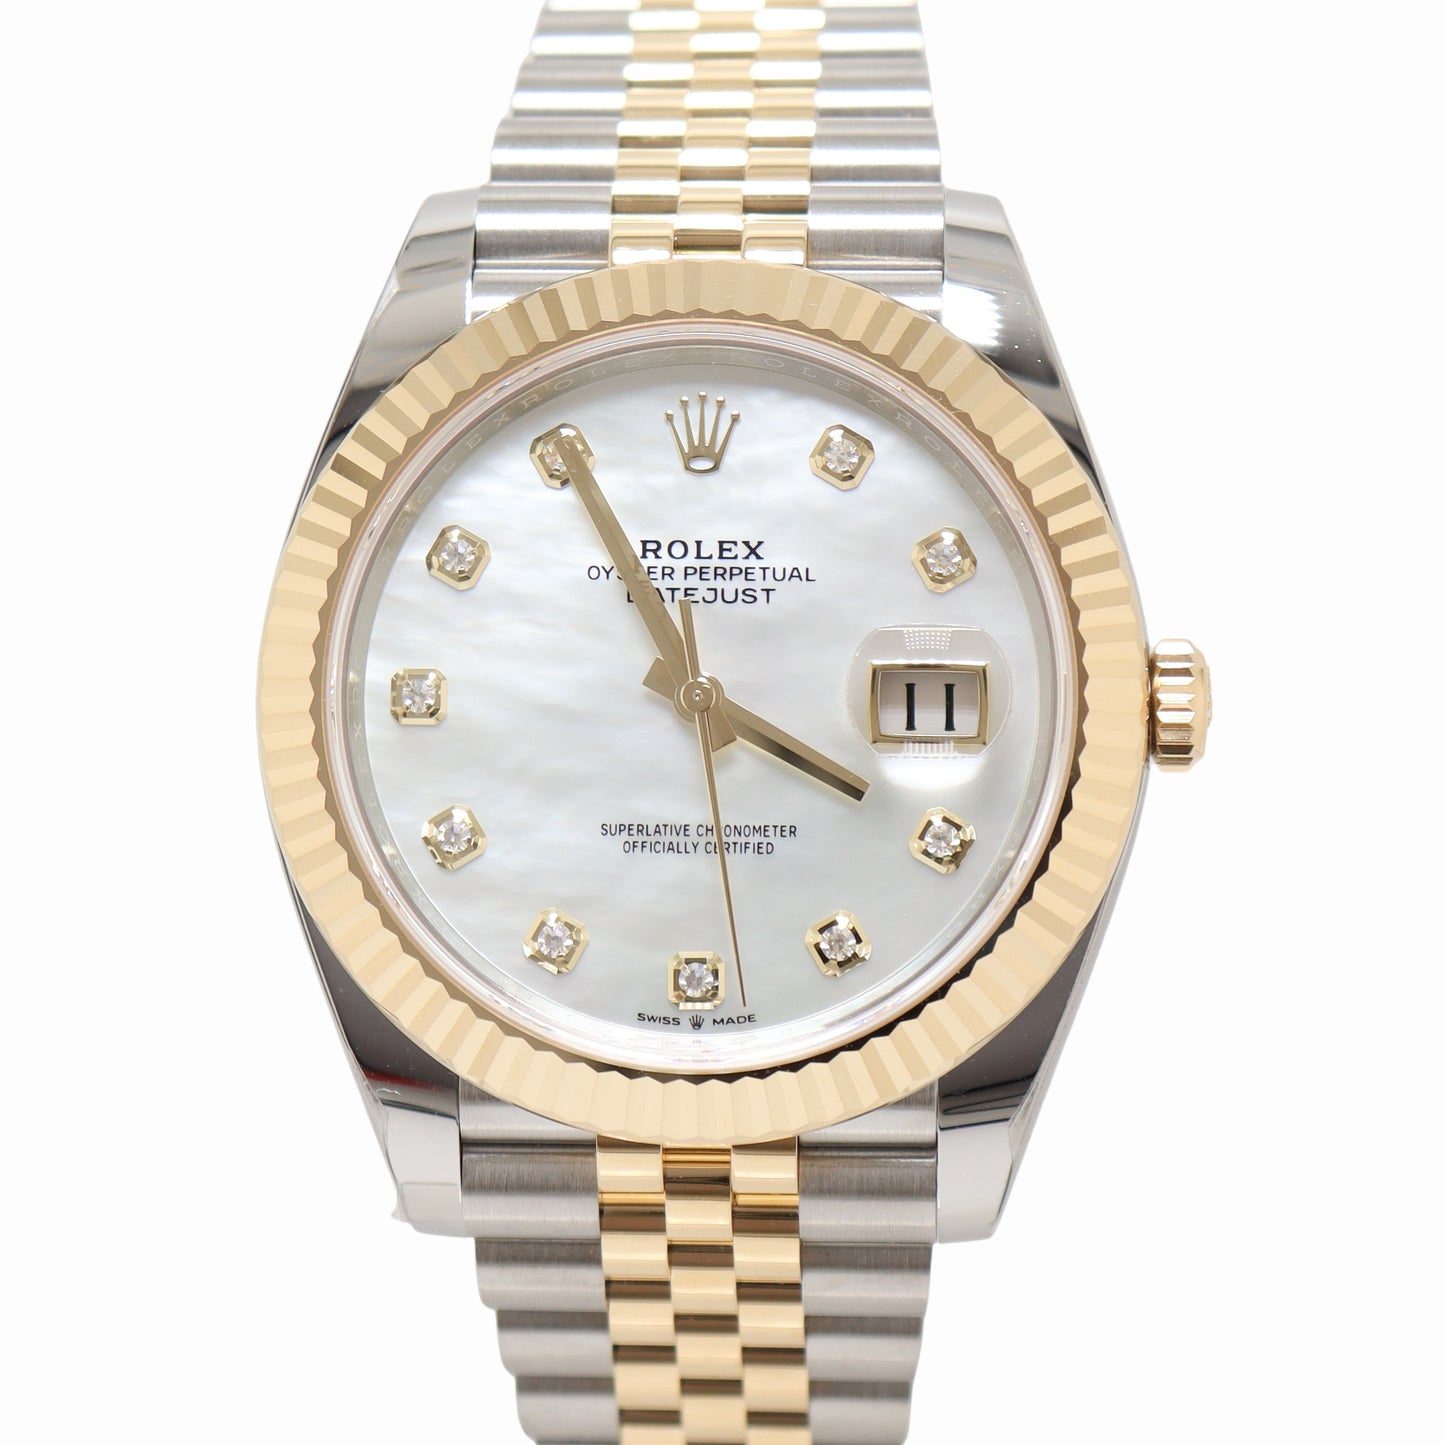 Rolex Datejust Two Tone Yellow Gold & Steel 41mm White MOP Diamond Dial Watch Reference #: 126333